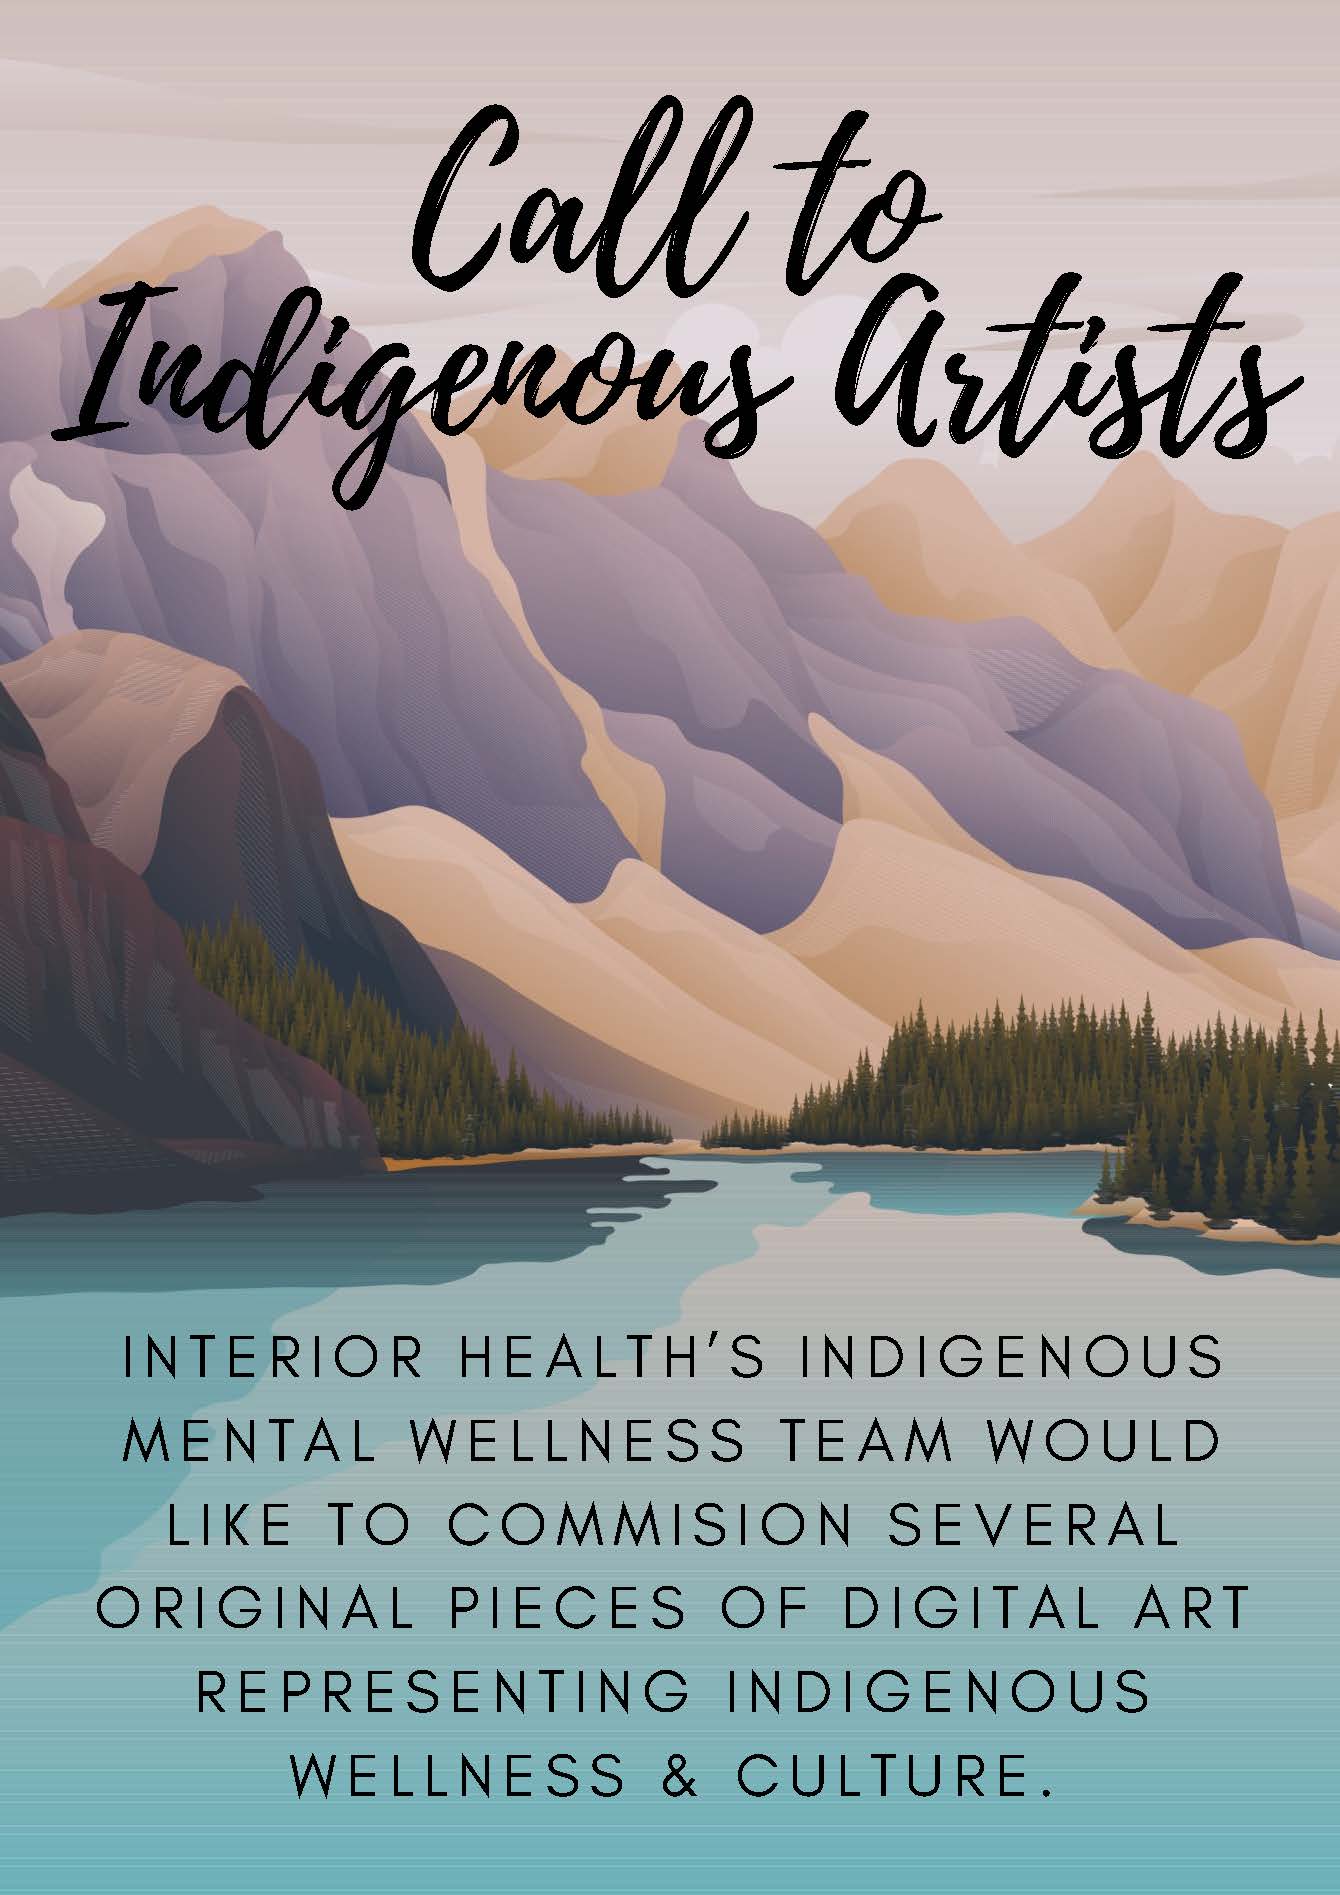 Call for Indigenous Artists – Interior Health Indigenous Wellness